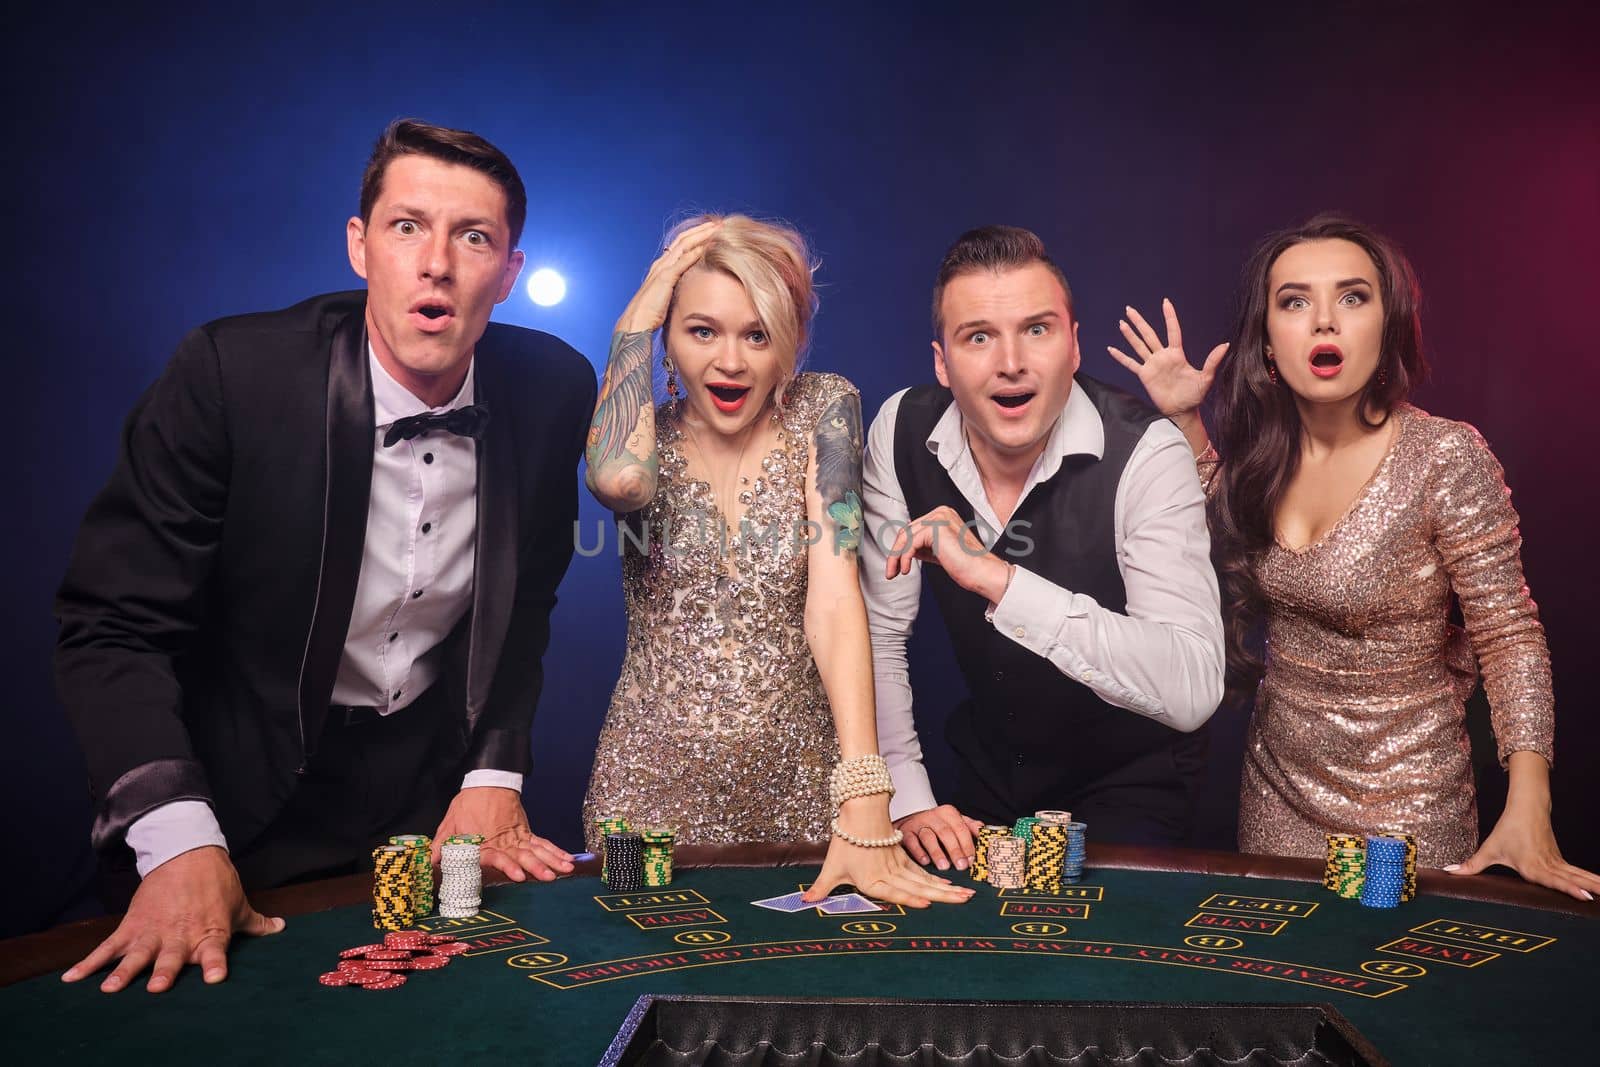 Group of a wondered rich classmates are playing poker at casino. Youth are making bets waiting for a big win. They are looking amazed standing at the table against a red and blue backlights on black background. Risky gambling entertainment.